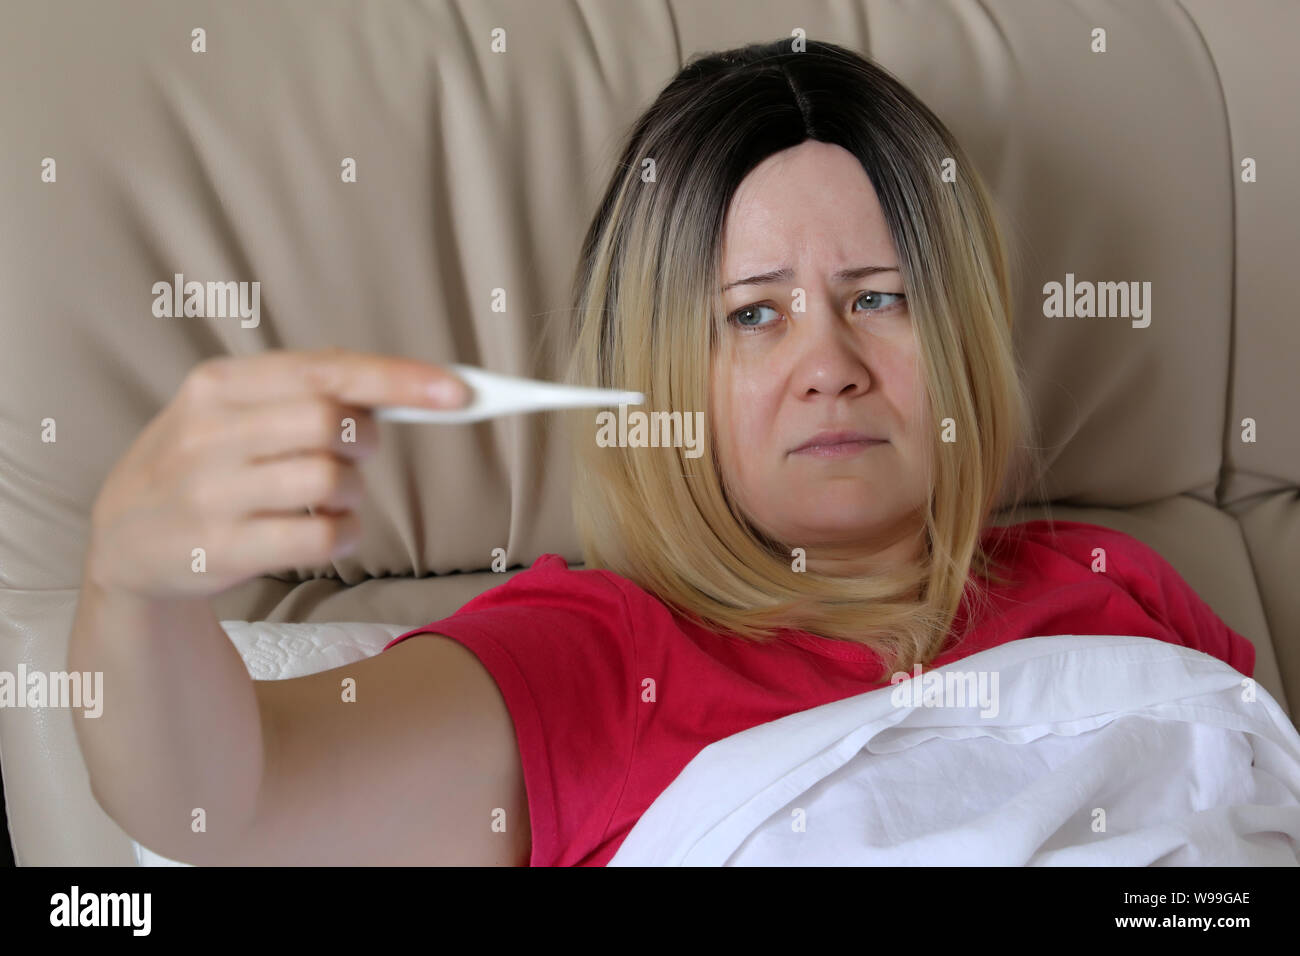 Sick woman measuring body temperature lying in a bed, digital thermometer in female hand. Concept of fever, cold and flu, illness, head pain Stock Photo